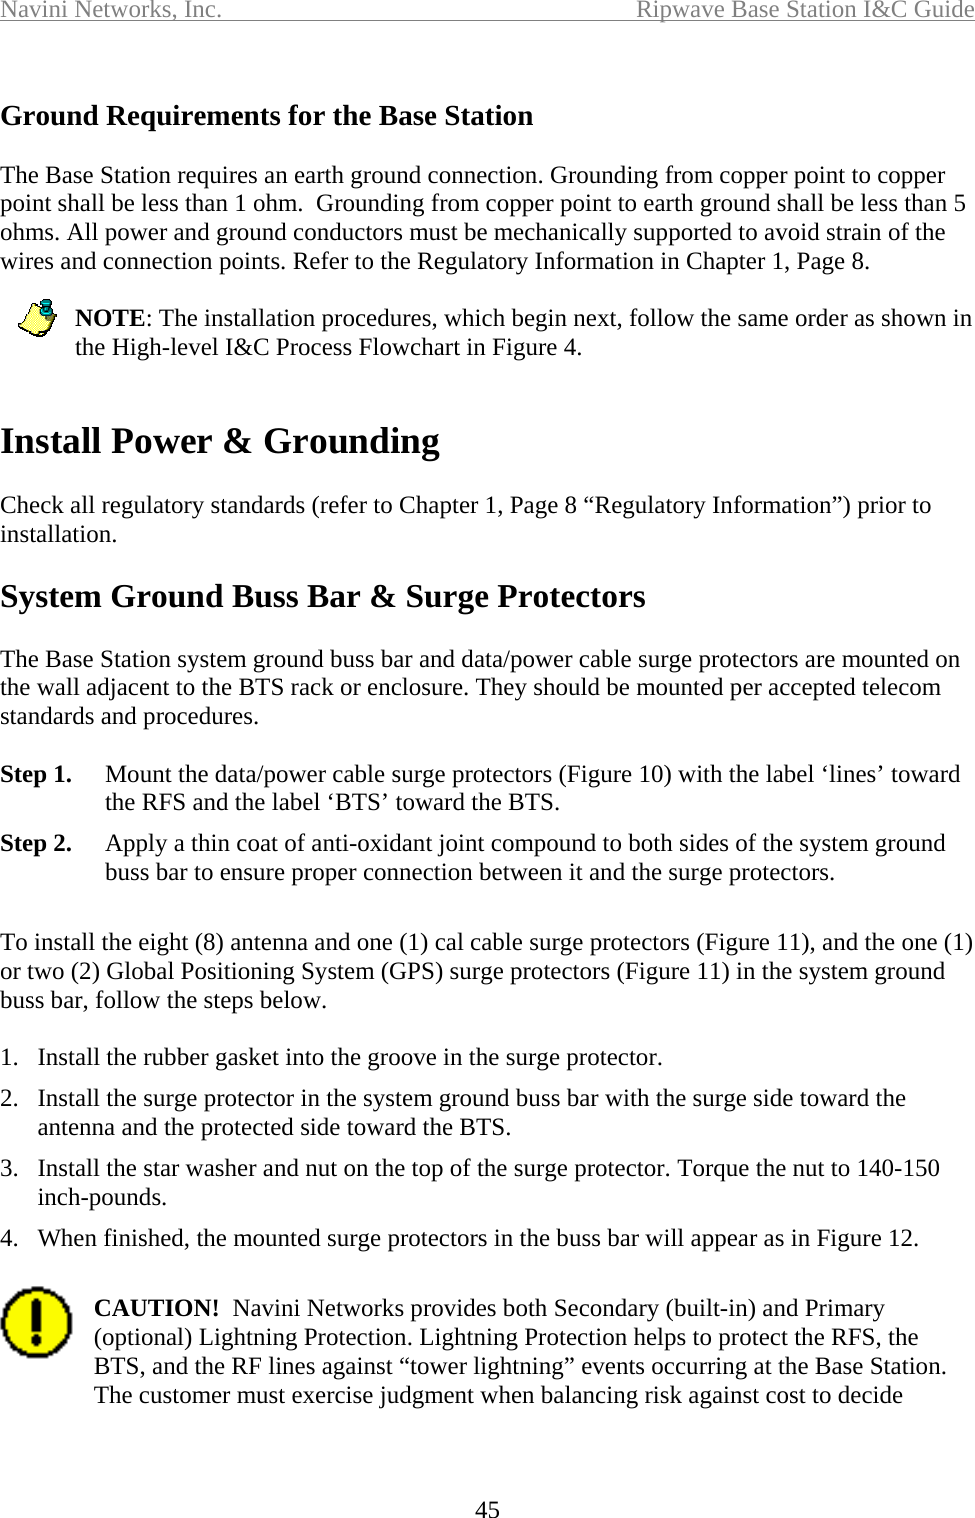 Navini Networks, Inc.  Ripwave Base Station I&amp;C Guide  45  Ground Requirements for the Base Station  The Base Station requires an earth ground connection. Grounding from copper point to copper point shall be less than 1 ohm.  Grounding from copper point to earth ground shall be less than 5 ohms. All power and ground conductors must be mechanically supported to avoid strain of the wires and connection points. Refer to the Regulatory Information in Chapter 1, Page 8.  NOTE: The installation procedures, which begin next, follow the same order as shown in the High-level I&amp;C Process Flowchart in Figure 4.   Install Power &amp; Grounding  Check all regulatory standards (refer to Chapter 1, Page 8 “Regulatory Information”) prior to installation.  System Ground Buss Bar &amp; Surge Protectors  The Base Station system ground buss bar and data/power cable surge protectors are mounted on the wall adjacent to the BTS rack or enclosure. They should be mounted per accepted telecom standards and procedures.   Step 1.  Mount the data/power cable surge protectors (Figure 10) with the label ‘lines’ toward the RFS and the label ‘BTS’ toward the BTS. Step 2.  Apply a thin coat of anti-oxidant joint compound to both sides of the system ground buss bar to ensure proper connection between it and the surge protectors.   To install the eight (8) antenna and one (1) cal cable surge protectors (Figure 11), and the one (1) or two (2) Global Positioning System (GPS) surge protectors (Figure 11) in the system ground buss bar, follow the steps below.  1.  Install the rubber gasket into the groove in the surge protector. 2.  Install the surge protector in the system ground buss bar with the surge side toward the antenna and the protected side toward the BTS. 3.  Install the star washer and nut on the top of the surge protector. Torque the nut to 140-150 inch-pounds. 4.  When finished, the mounted surge protectors in the buss bar will appear as in Figure 12.  CAUTION!  Navini Networks provides both Secondary (built-in) and Primary (optional) Lightning Protection. Lightning Protection helps to protect the RFS, the BTS, and the RF lines against “tower lightning” events occurring at the Base Station.  The customer must exercise judgment when balancing risk against cost to decide   